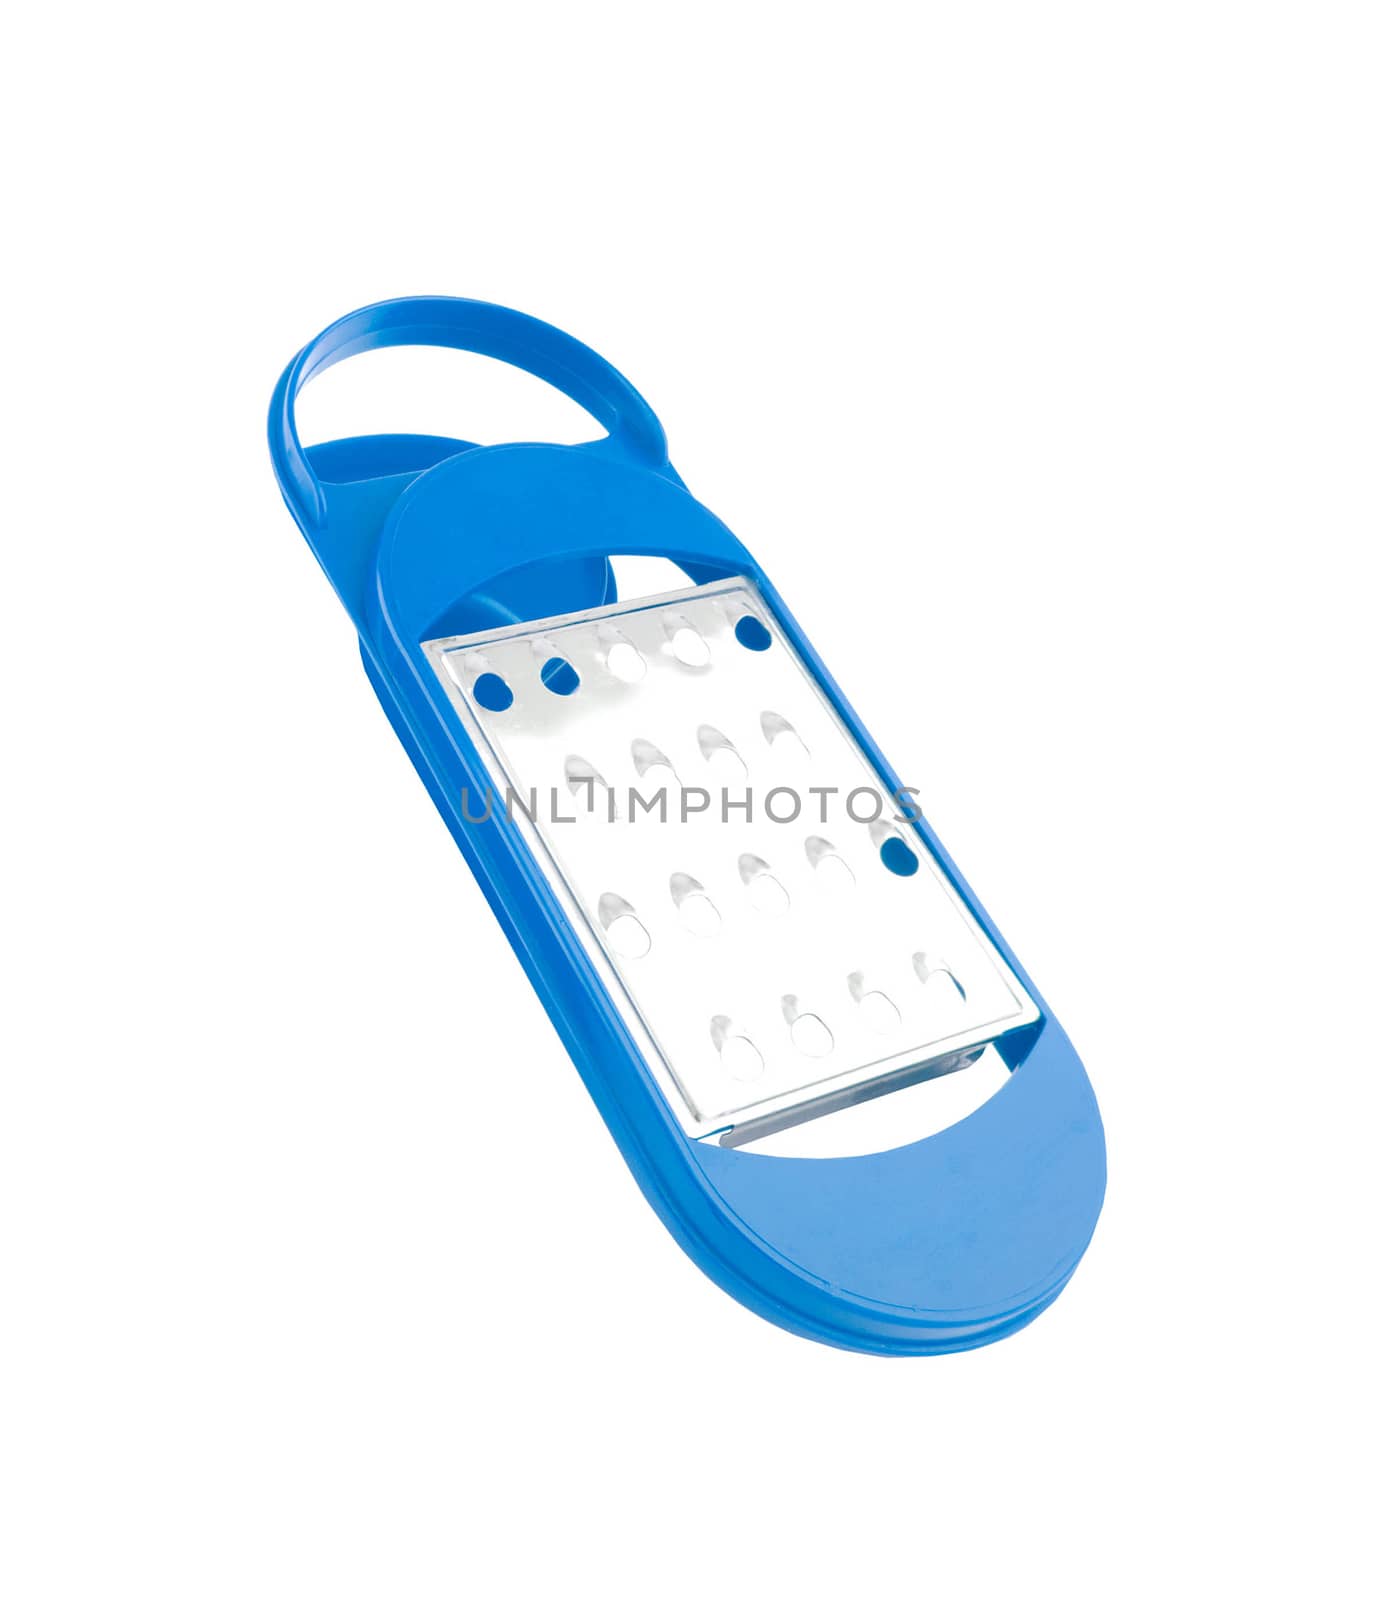 grater with a blue handle by shutswis